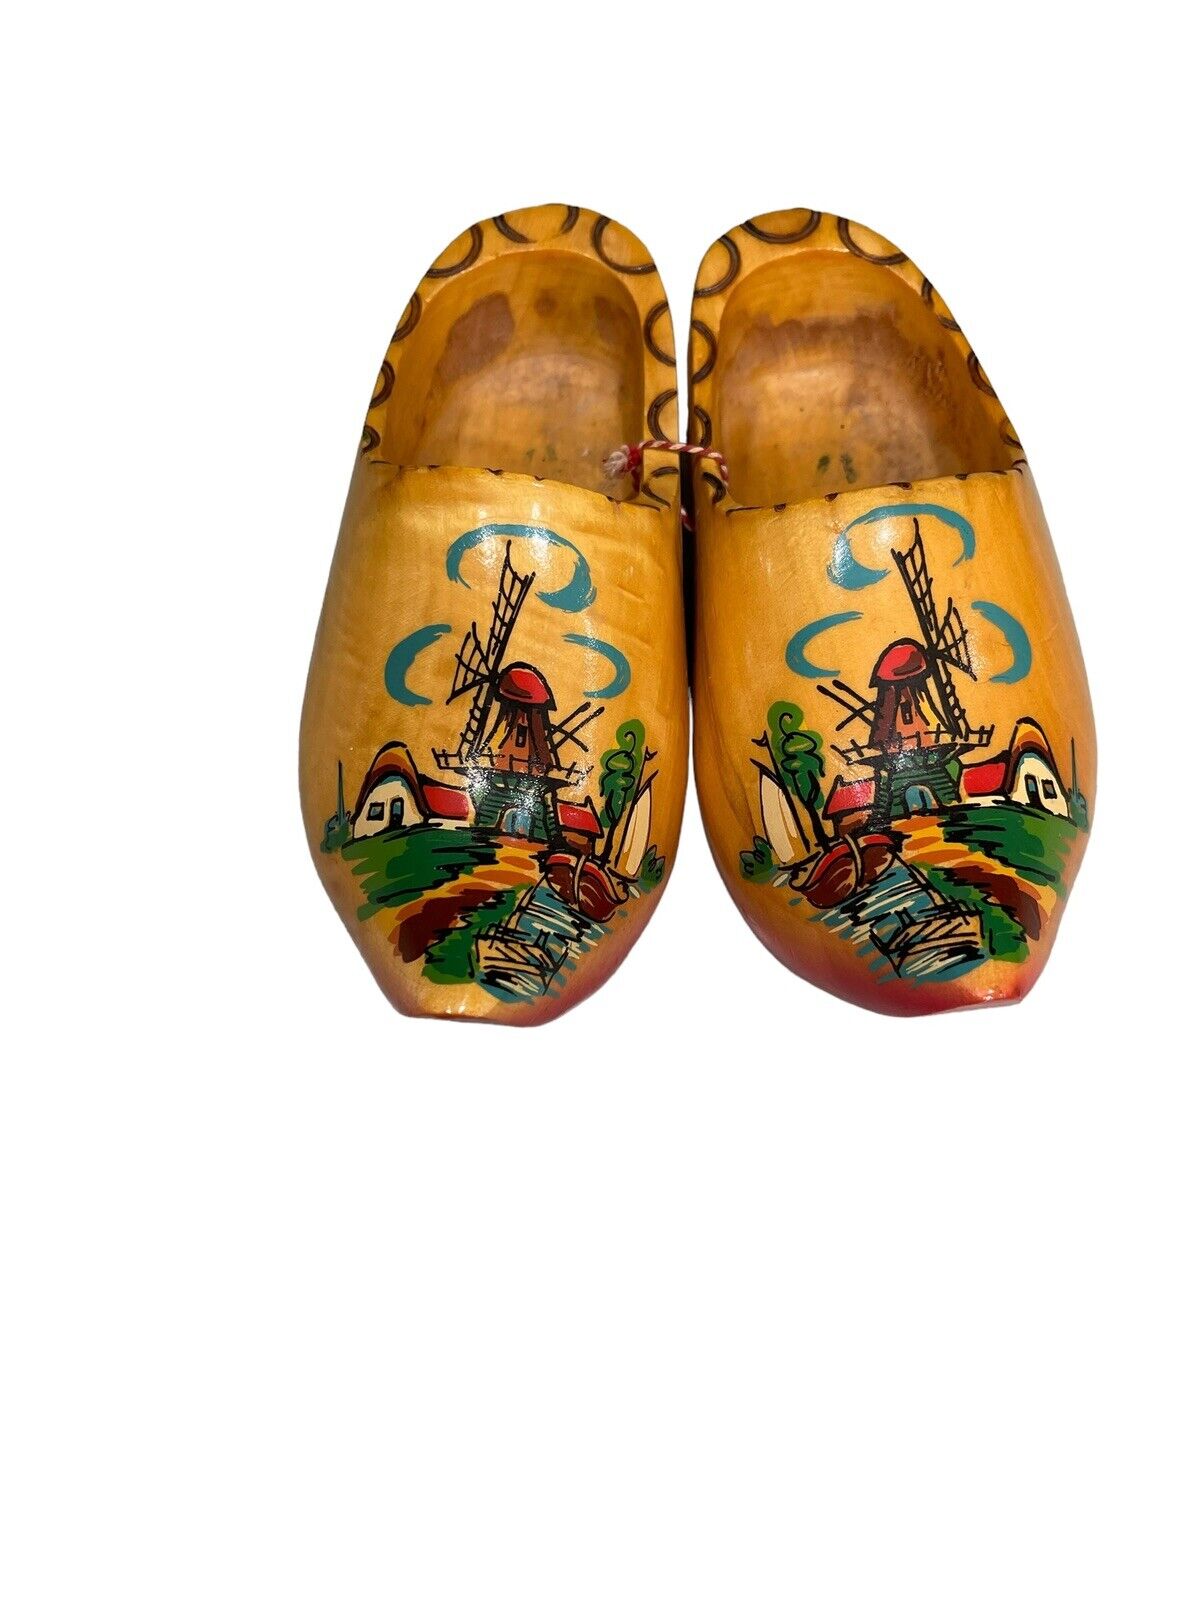 Hand Made Holland Carved Clogs Windmill Painting Wooden Shoes